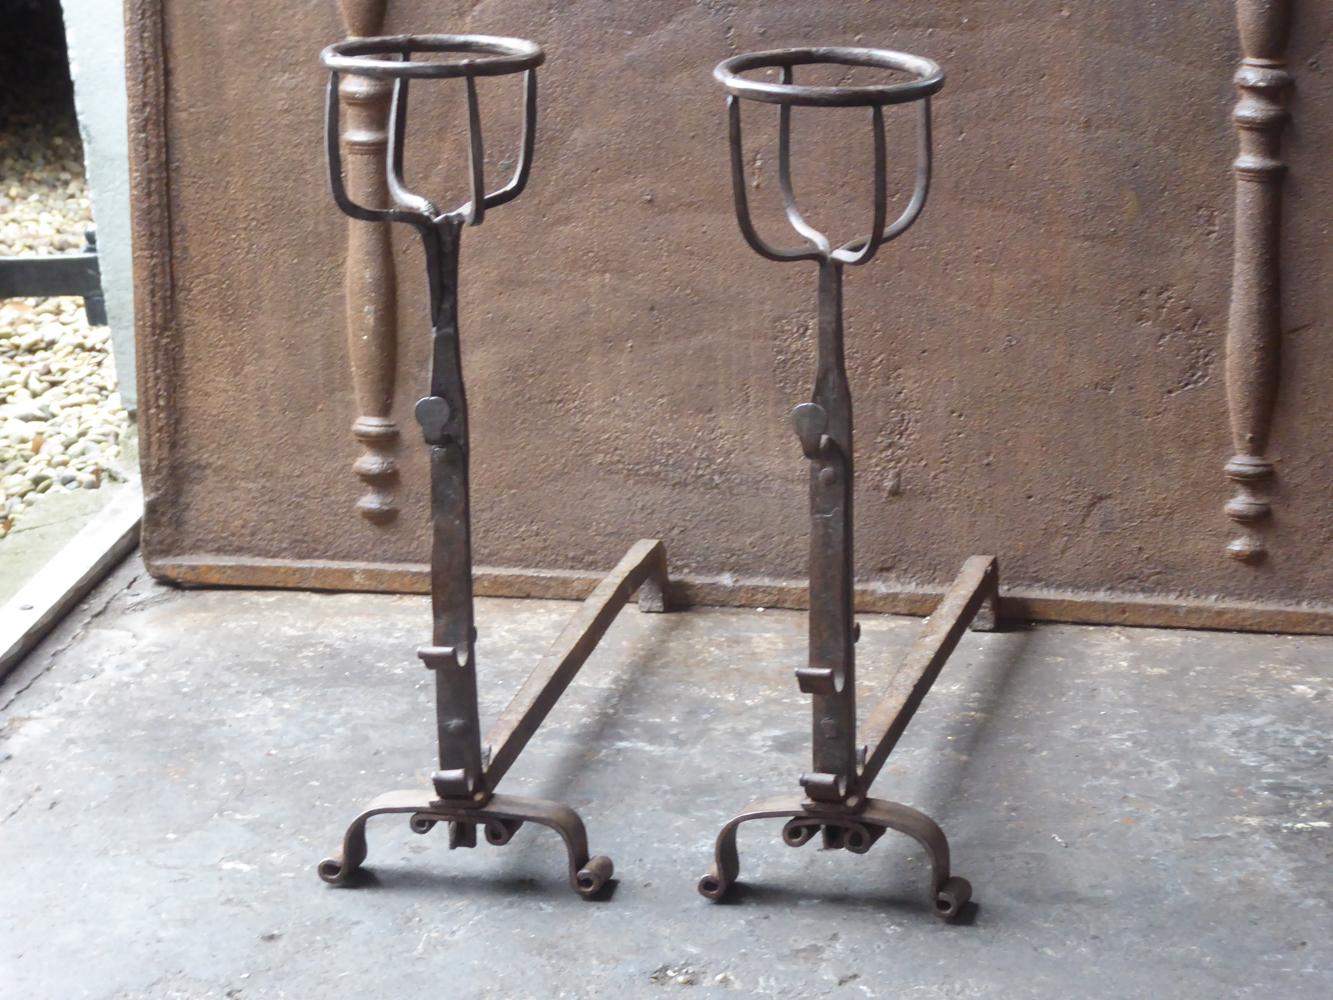 17th century French andirons made of wrought iron. The style of the andirons is Gothic. The andirons have spit hooks to grill food. They have a natural brown patina. The condition is good.